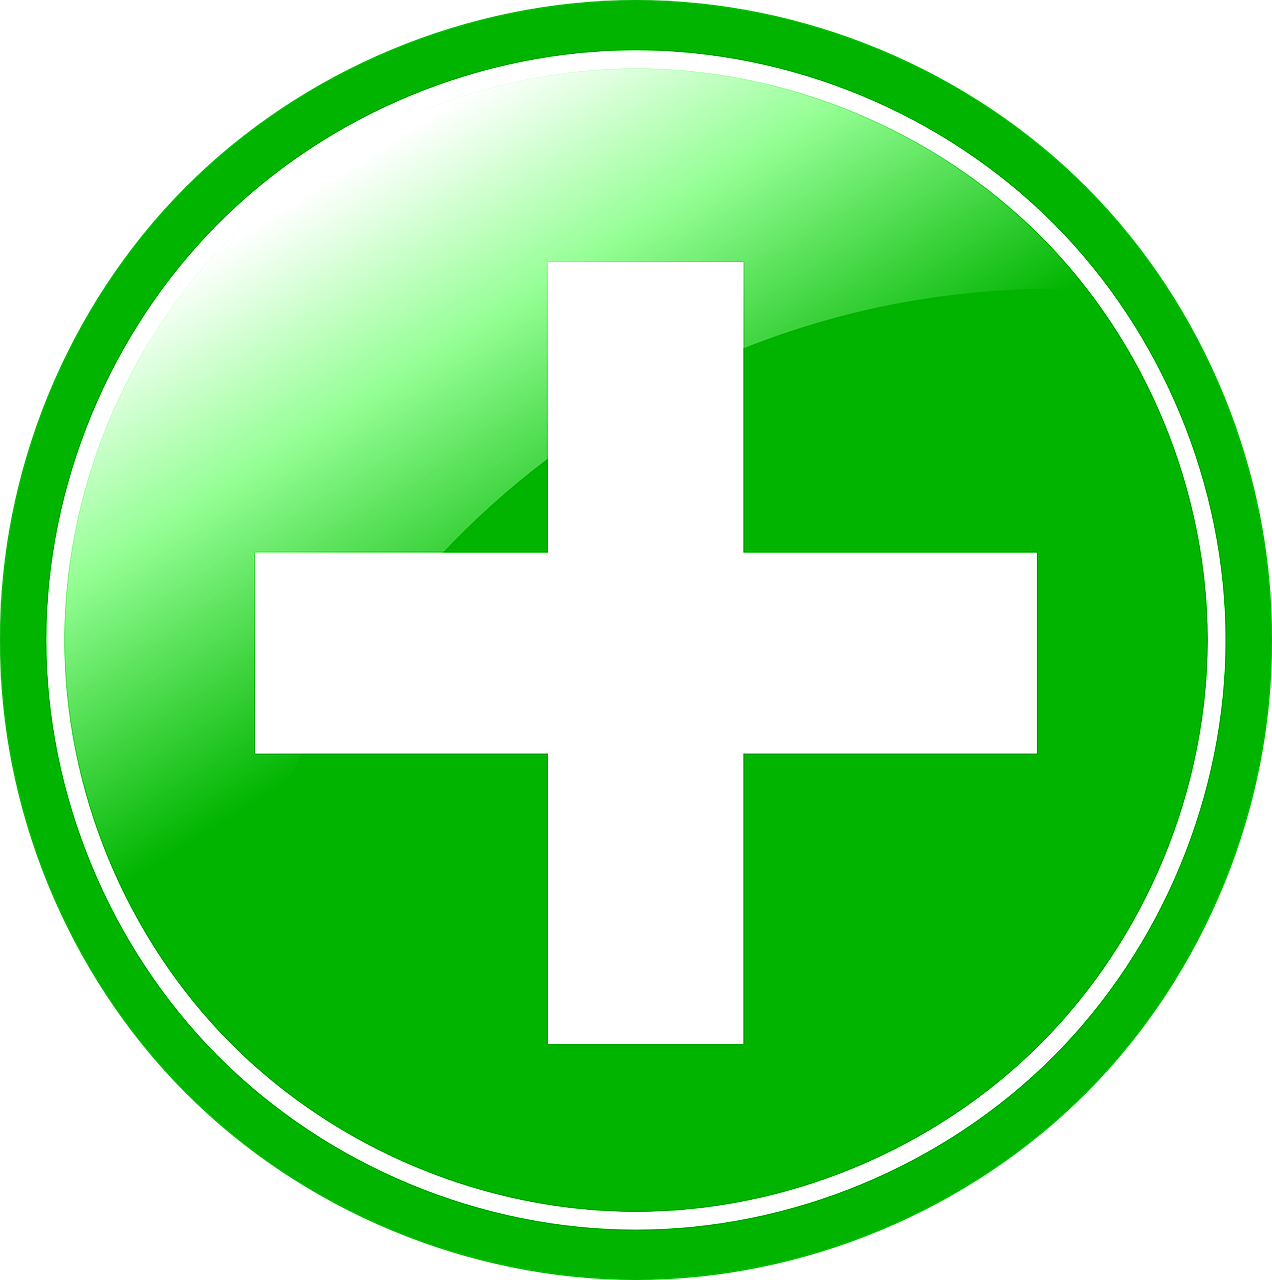 A Green Circle With A White Cross